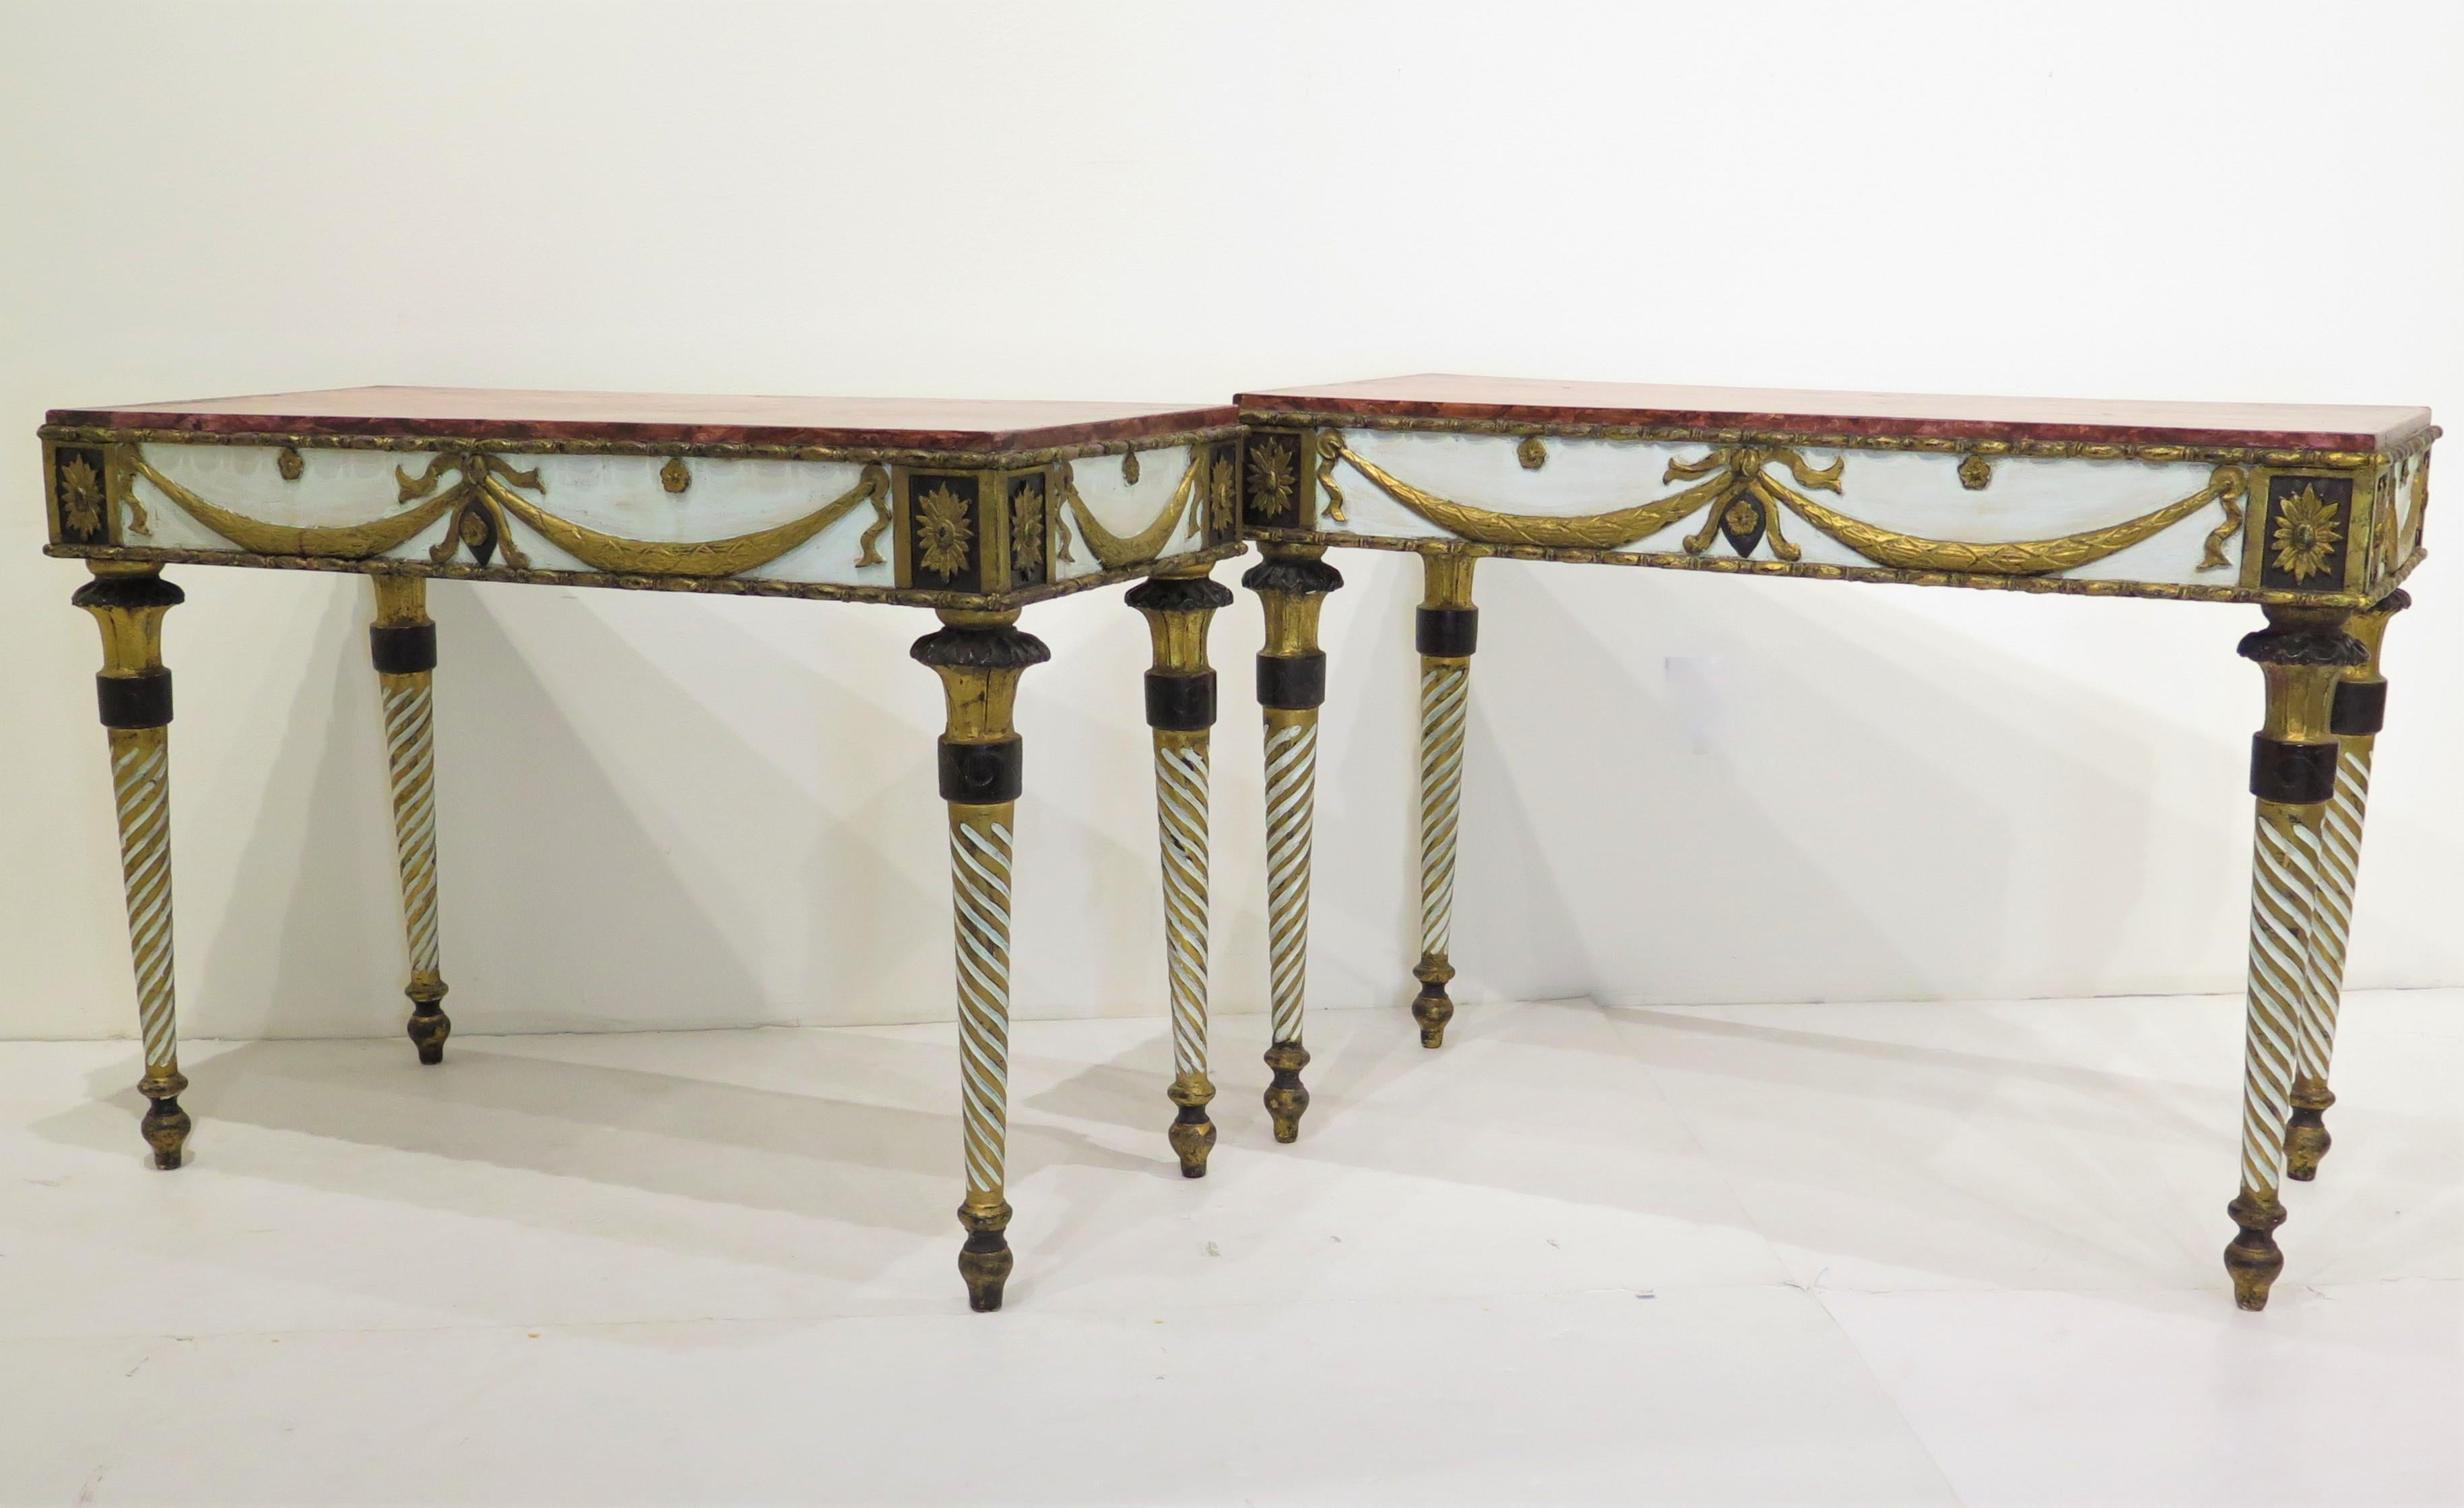 pair of Neoclassic-style console tables, polychromed and gilded wood with painted faux marble tops, gilt garland swags, spiral carved legs. Italy, circa 1875